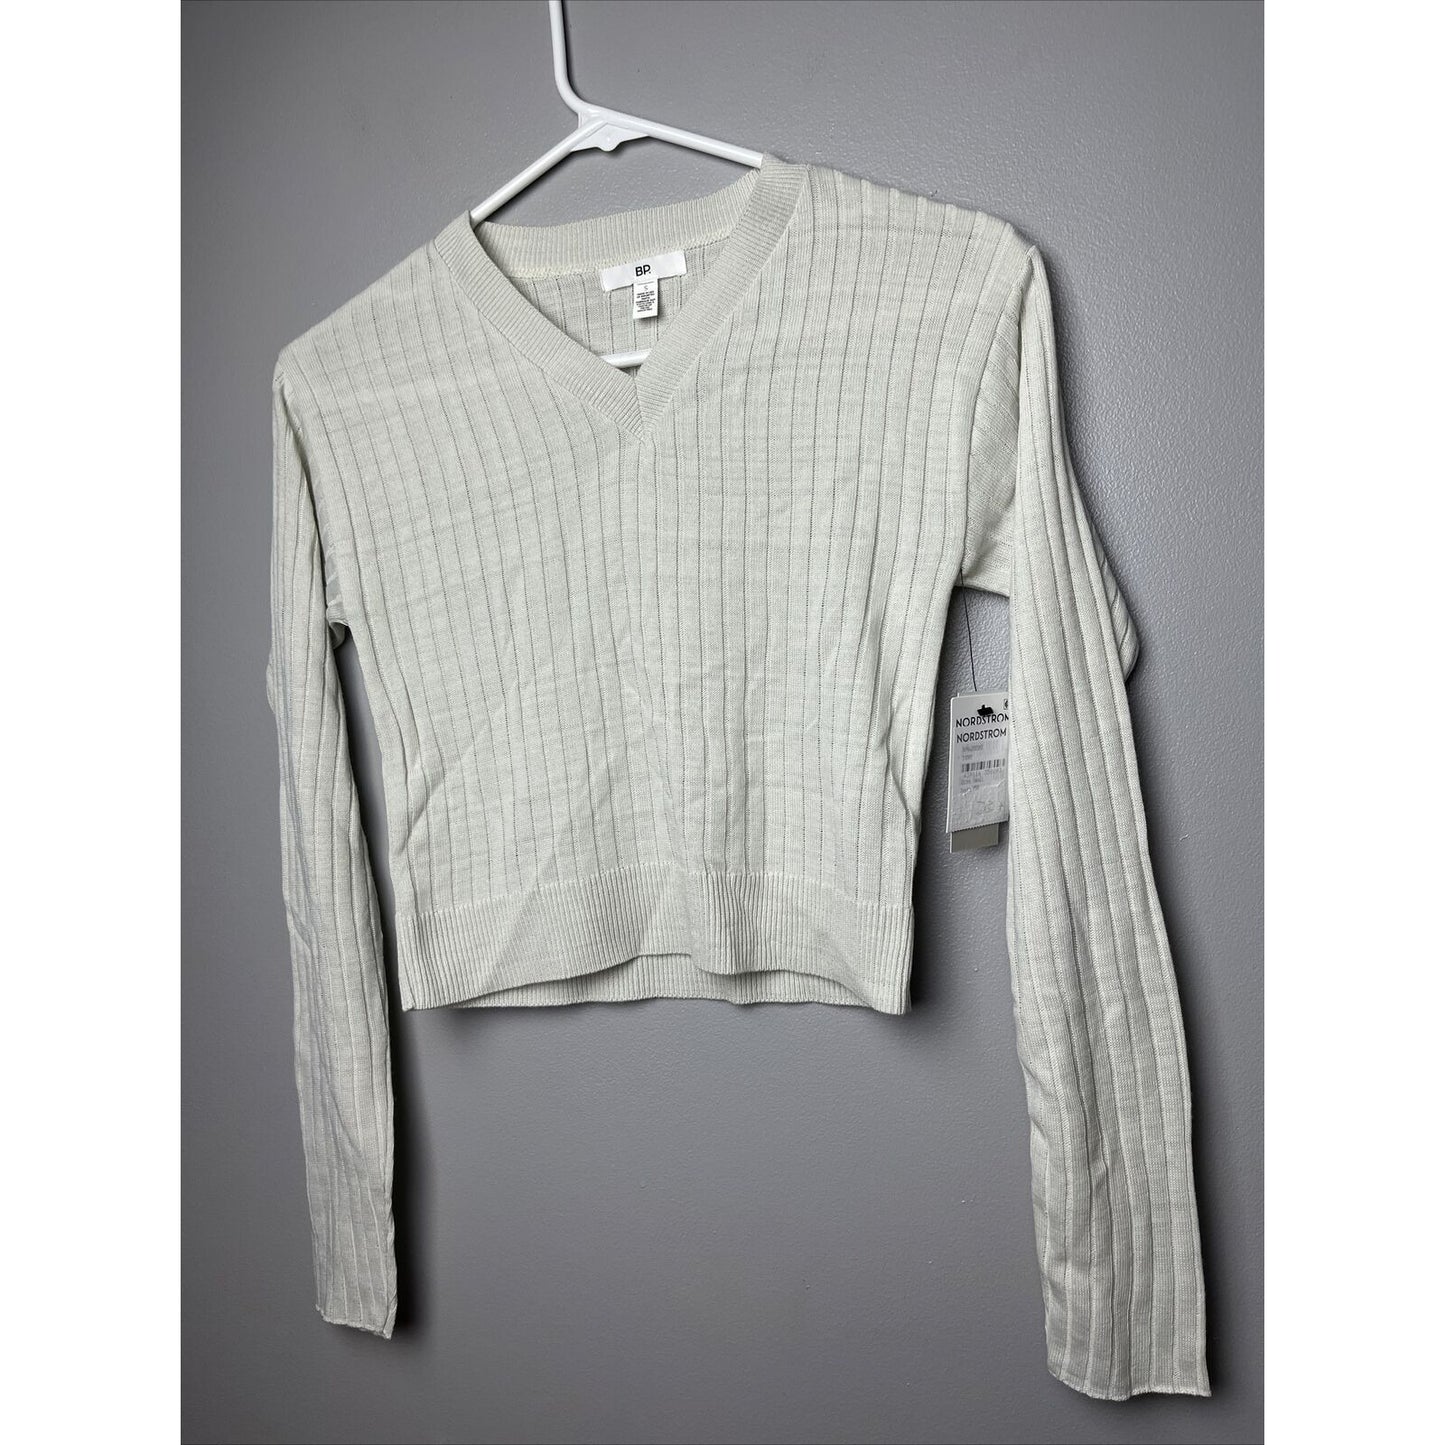 BP. Reagan Rib Crop Sweater in Ivory, Size Small